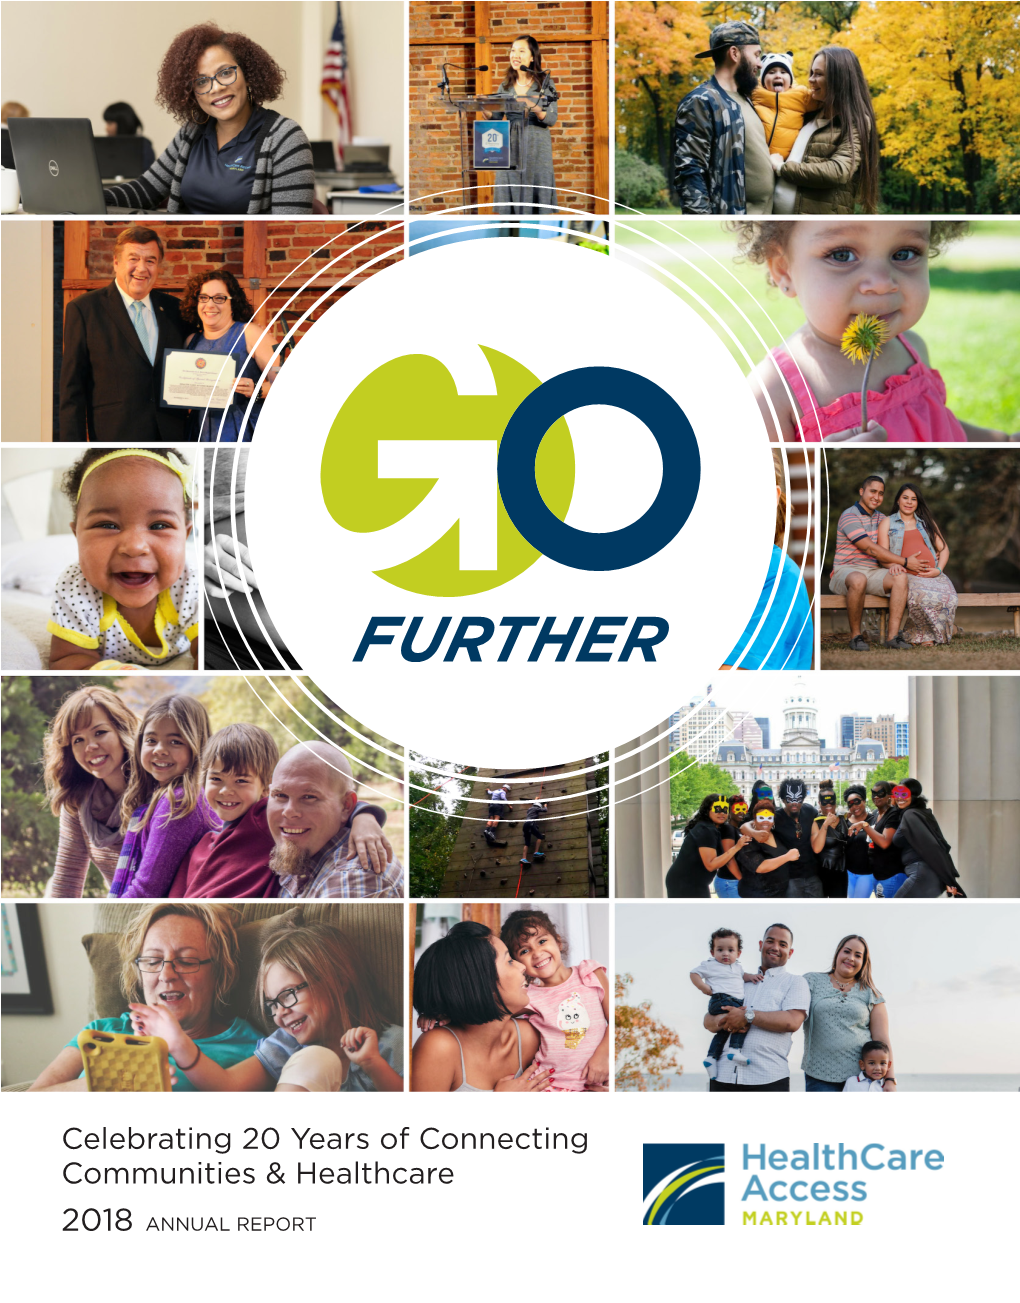 Celebrating 20 Years of Connecting Communities & Healthcare